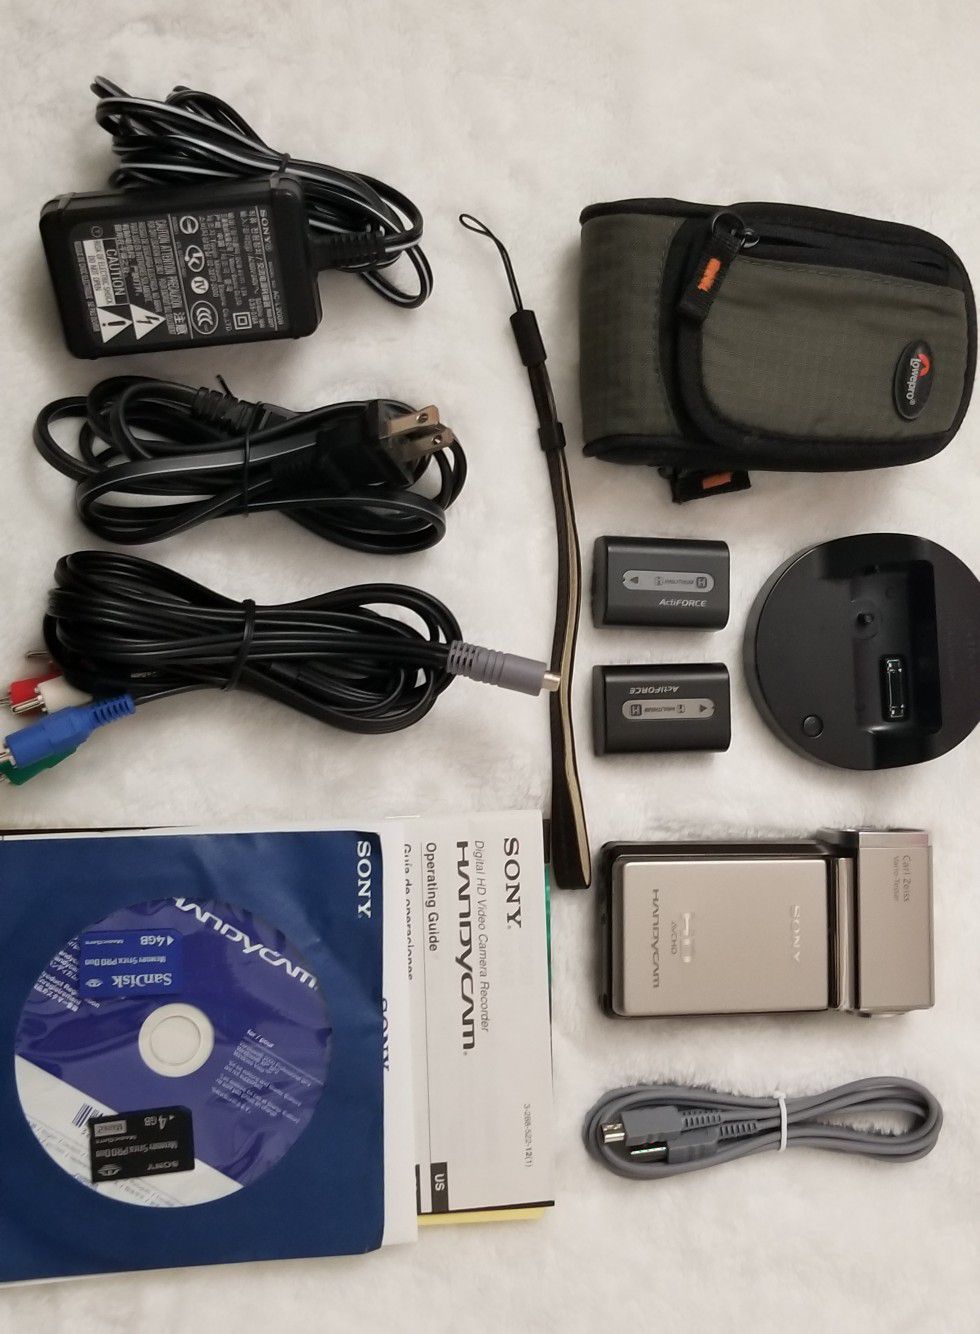 Sony 1080 HD video camcorder HDR-TG1, good condition